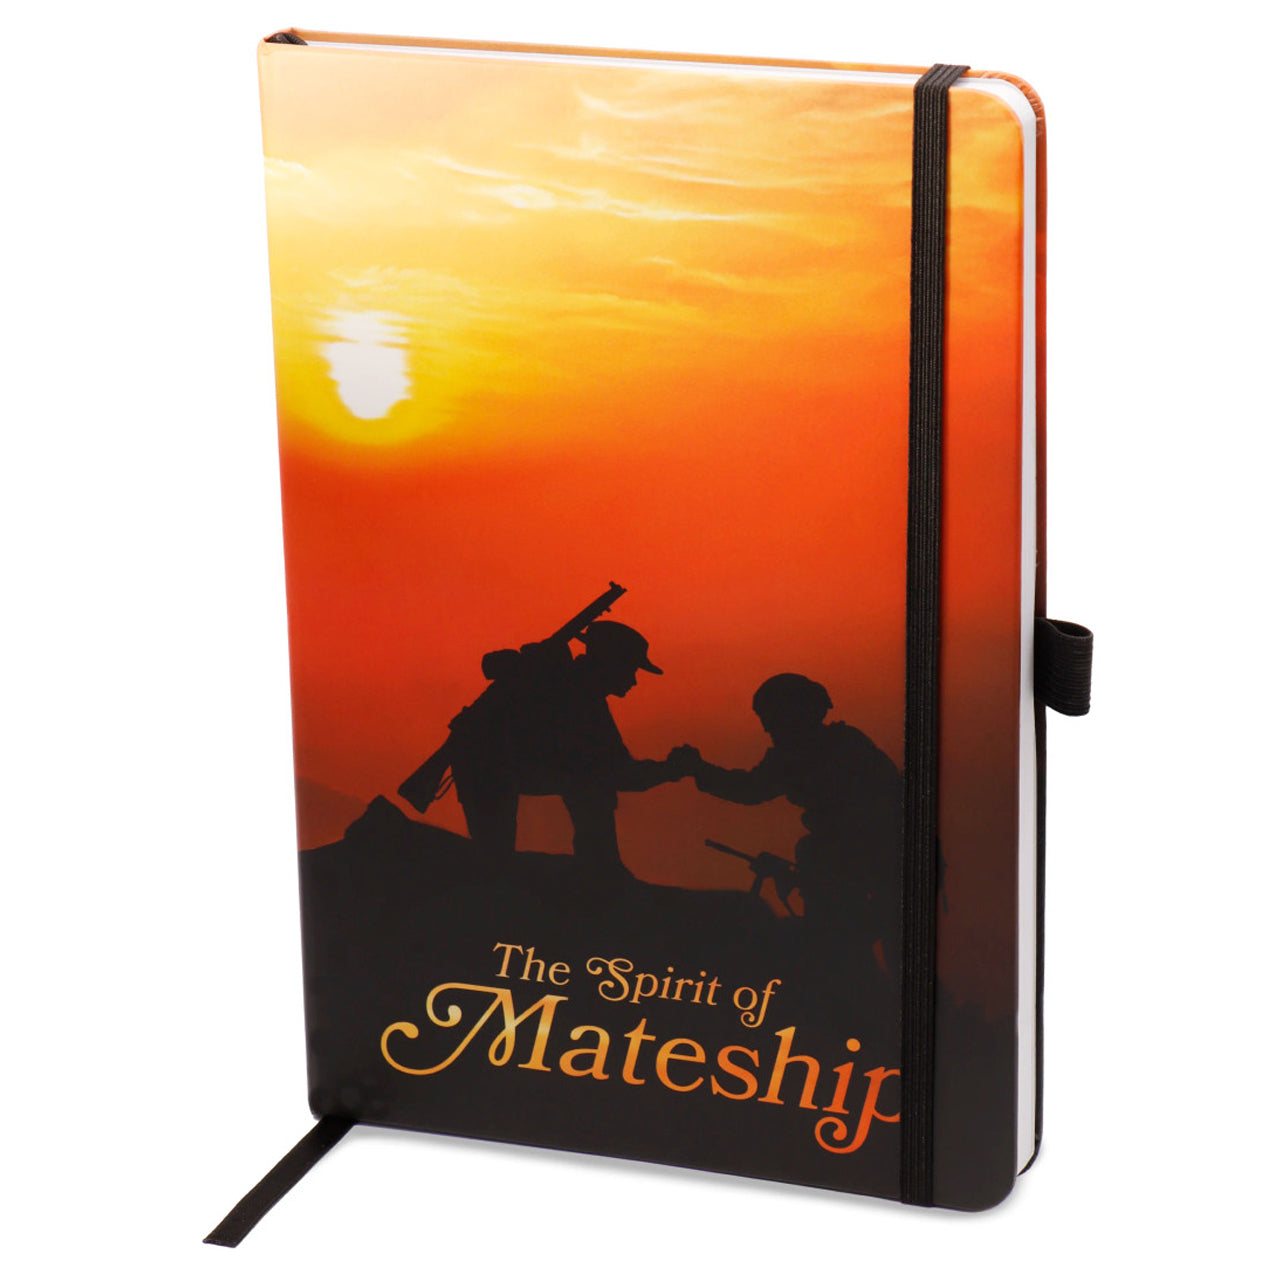 The Spirit of Mateship Notebook is a tribute to the enduring bonds of camaraderie, service, and sacrifice that define the Australian spirit. This A5 notebook is a profound embodiment of our nation's military history and the unwavering support shared among our soldiers. www.defenceqstore.com.au